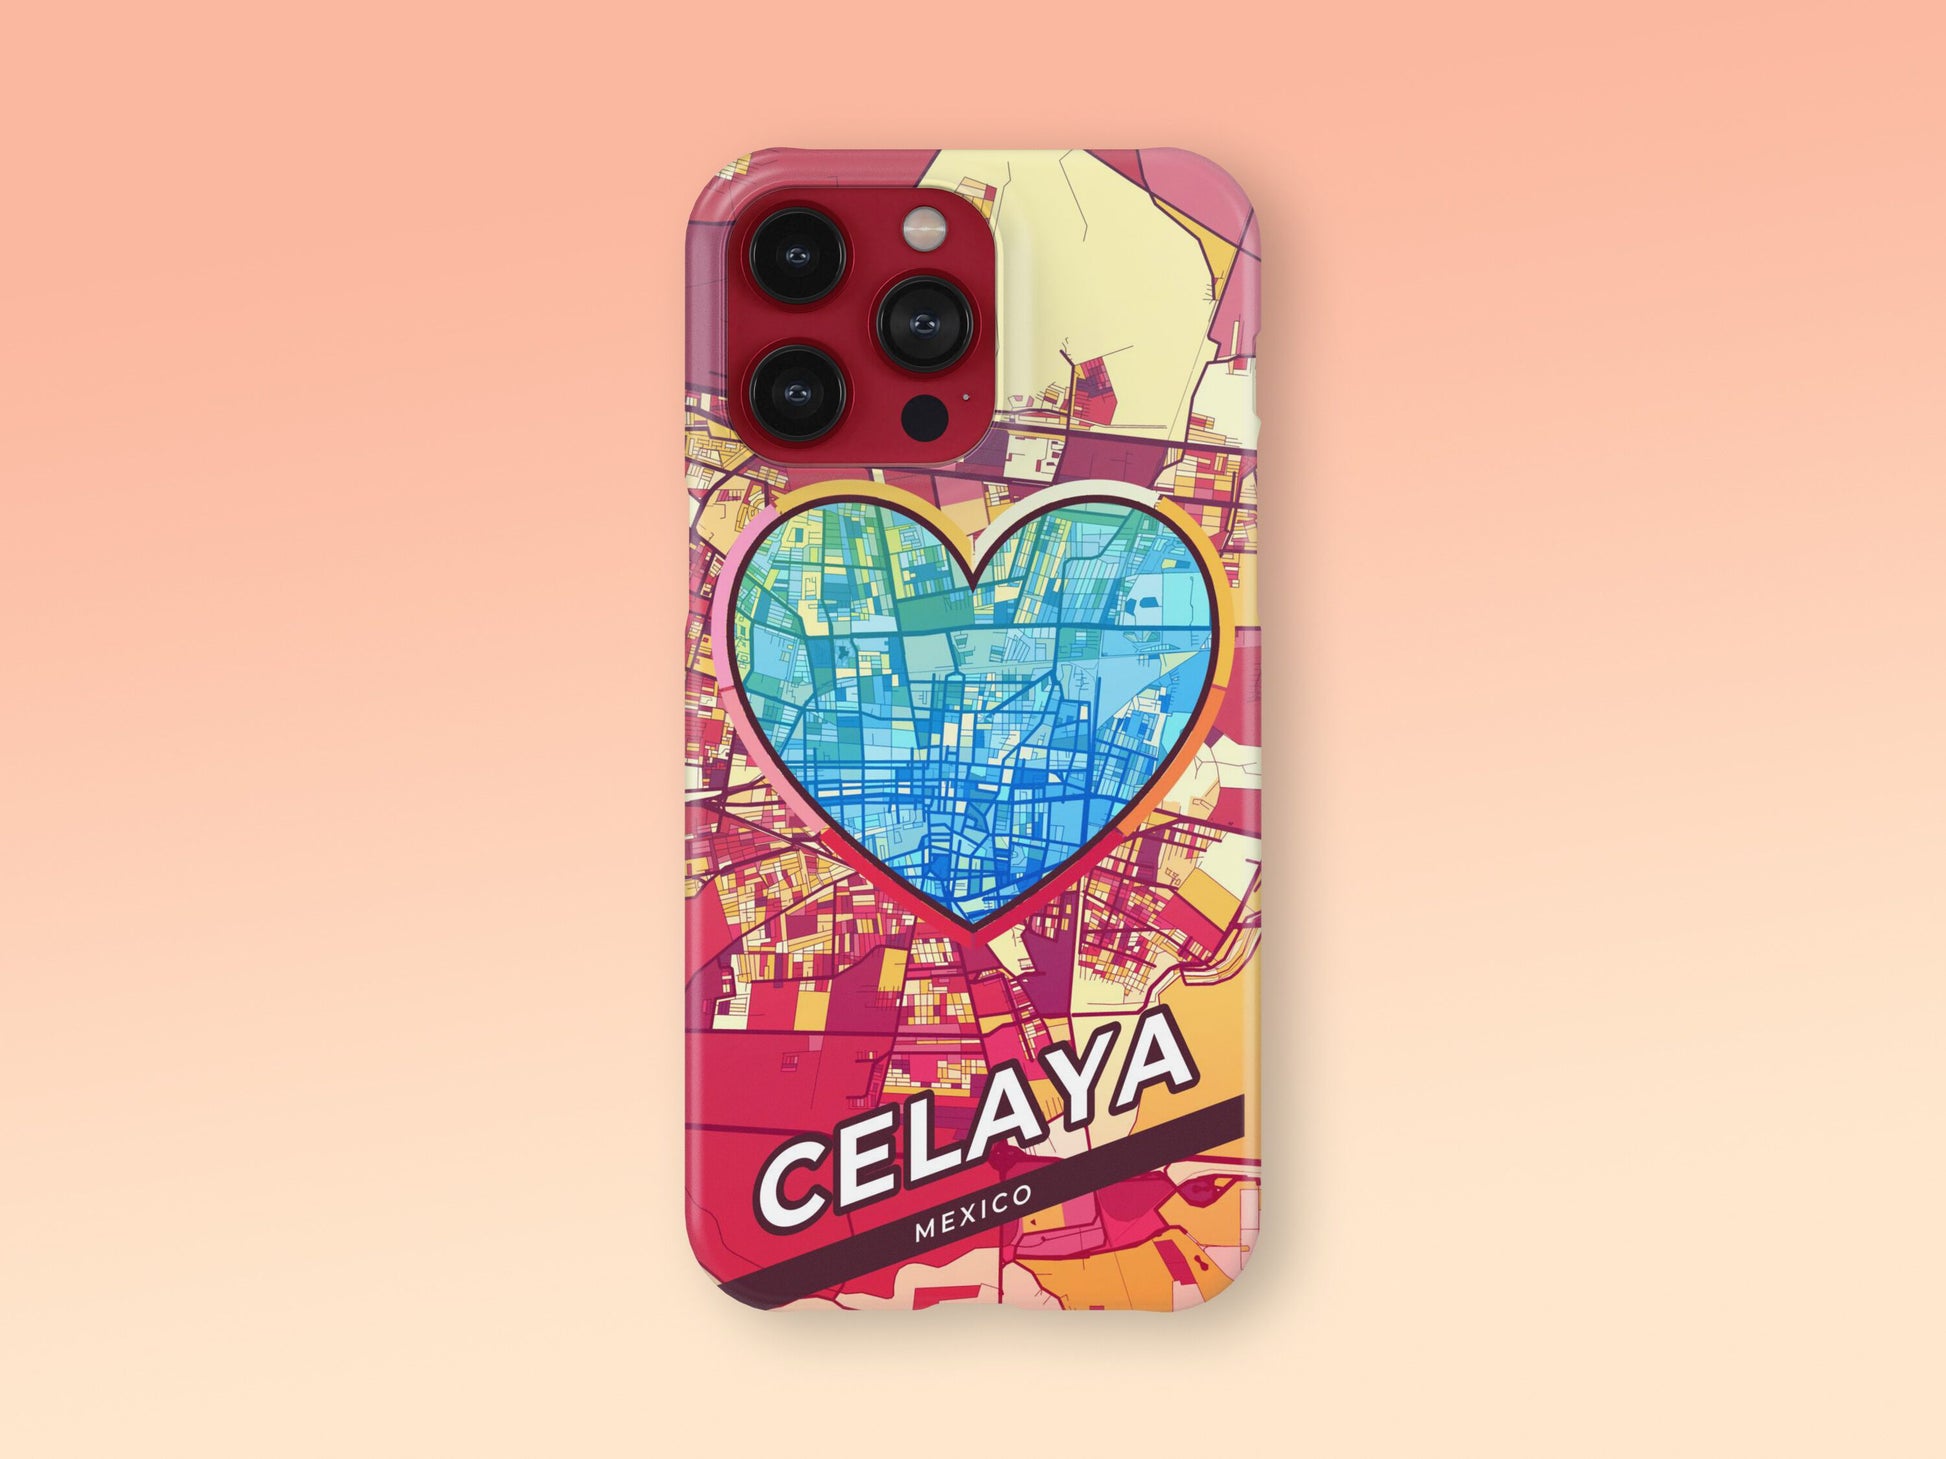 Celaya Mexico slim phone case with colorful icon. Birthday, wedding or housewarming gift. Couple match cases. 2